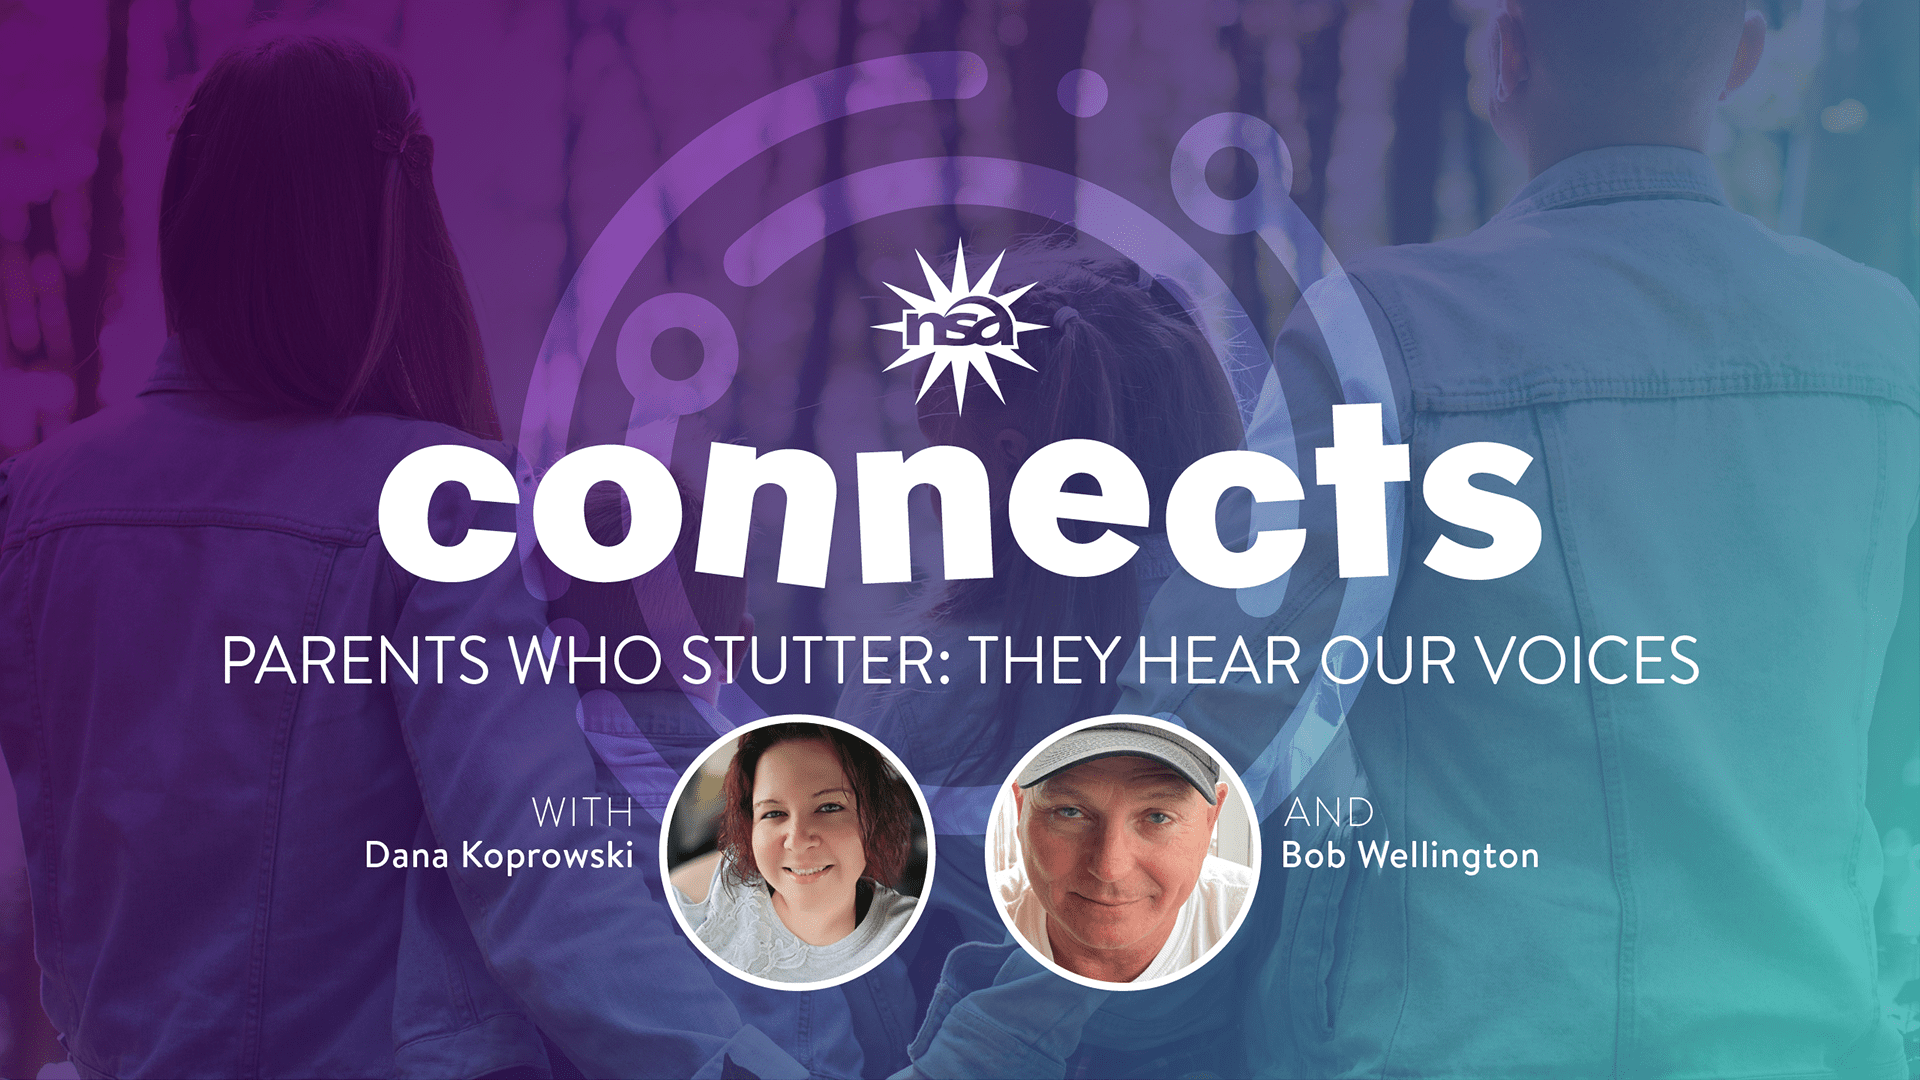 Image with a gradient background showing two adults and a child from behind, holding hands. Text reads "connects: Parents Who Stutter: They Hear Our Voices" with circular photos of Dana Koprowski and Bob Wellington beneath.